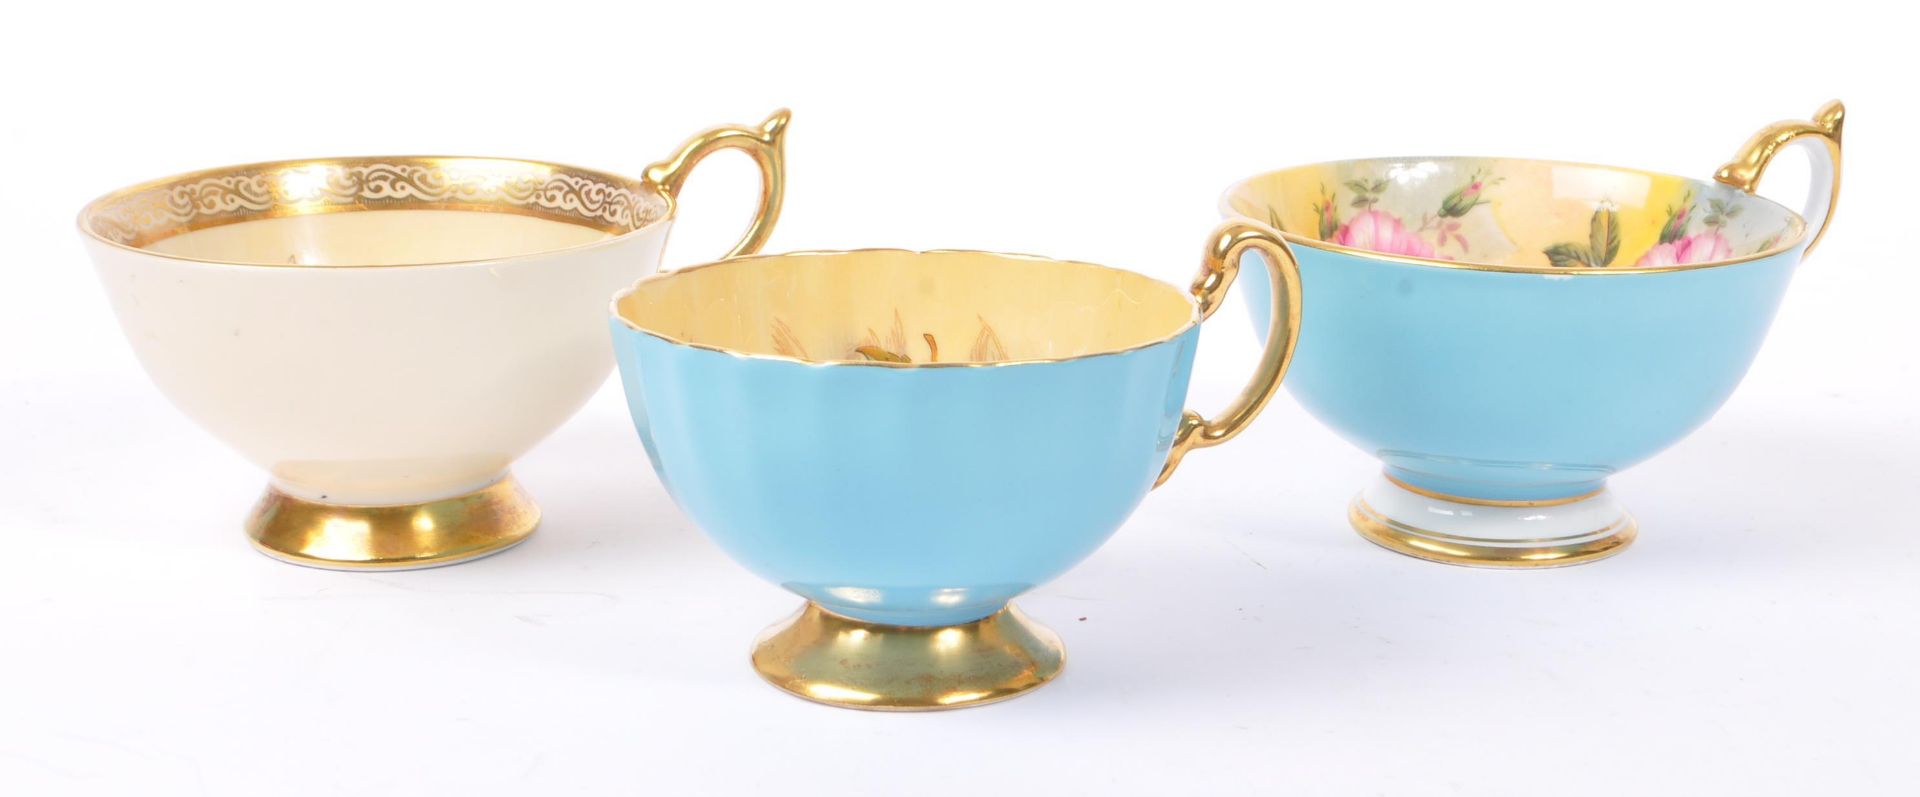 AYNSLEY - COLLECTION OF 20TH CENTURY CABINET TEACUPS - Image 9 of 11